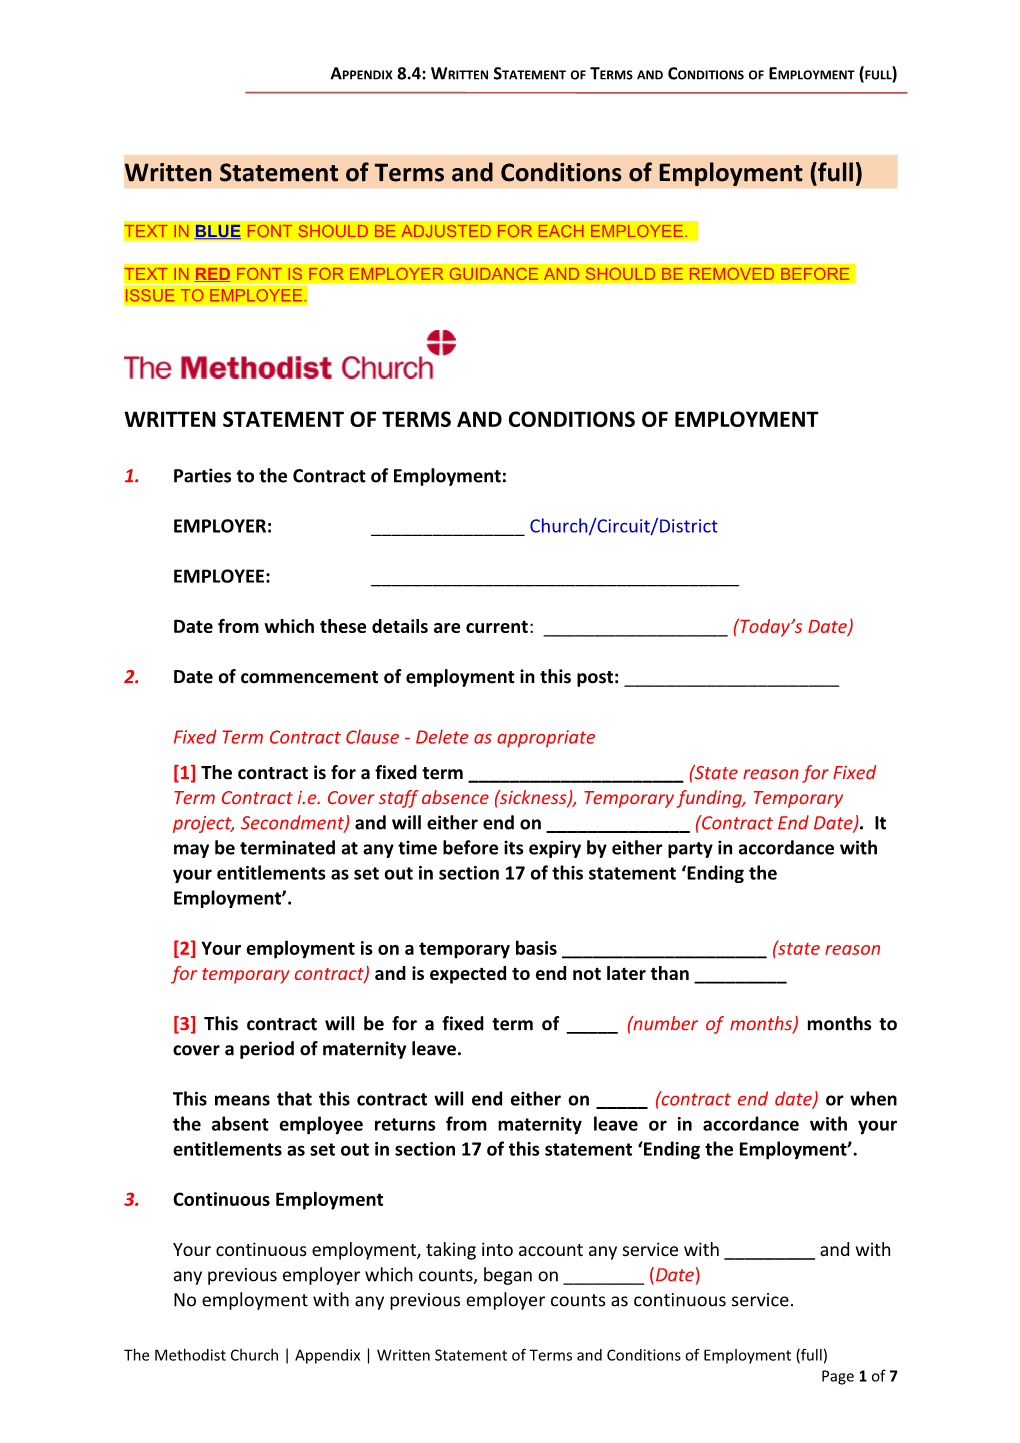 Written Statement of Terms and Conditions of Employment (Full)